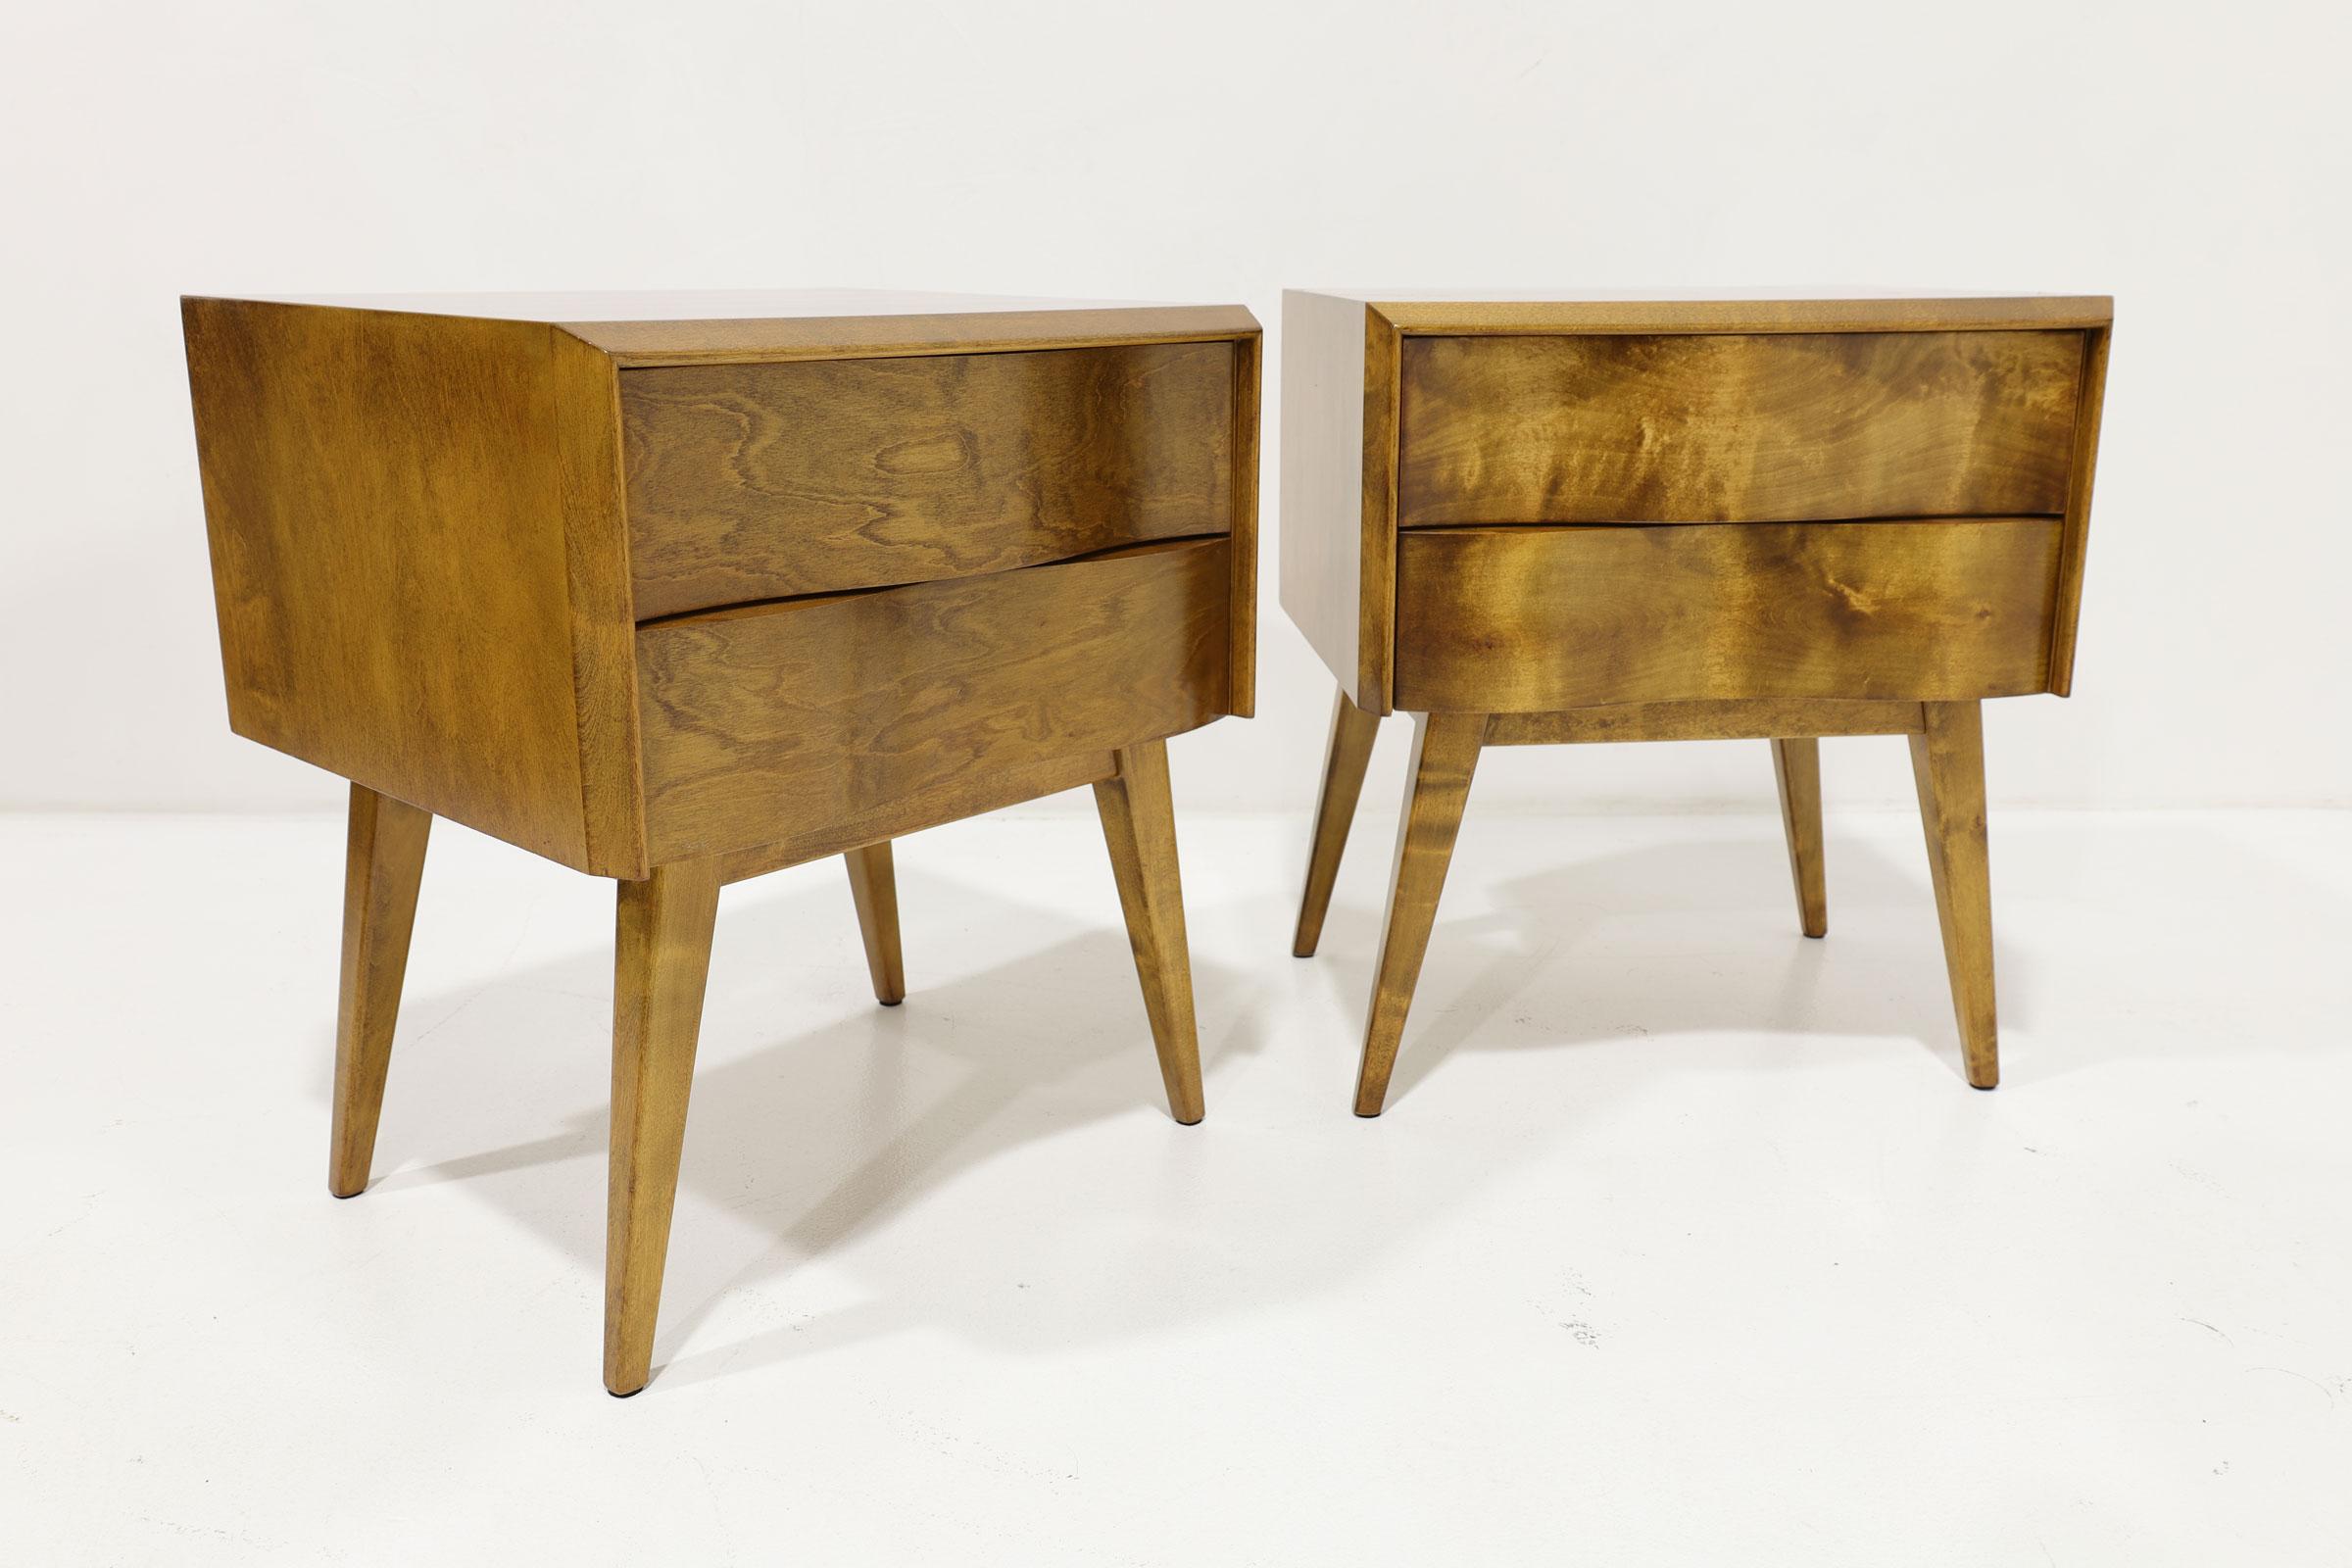 Edmond Spence Wavy Front Nightstands in Birch In Good Condition For Sale In Dallas, TX